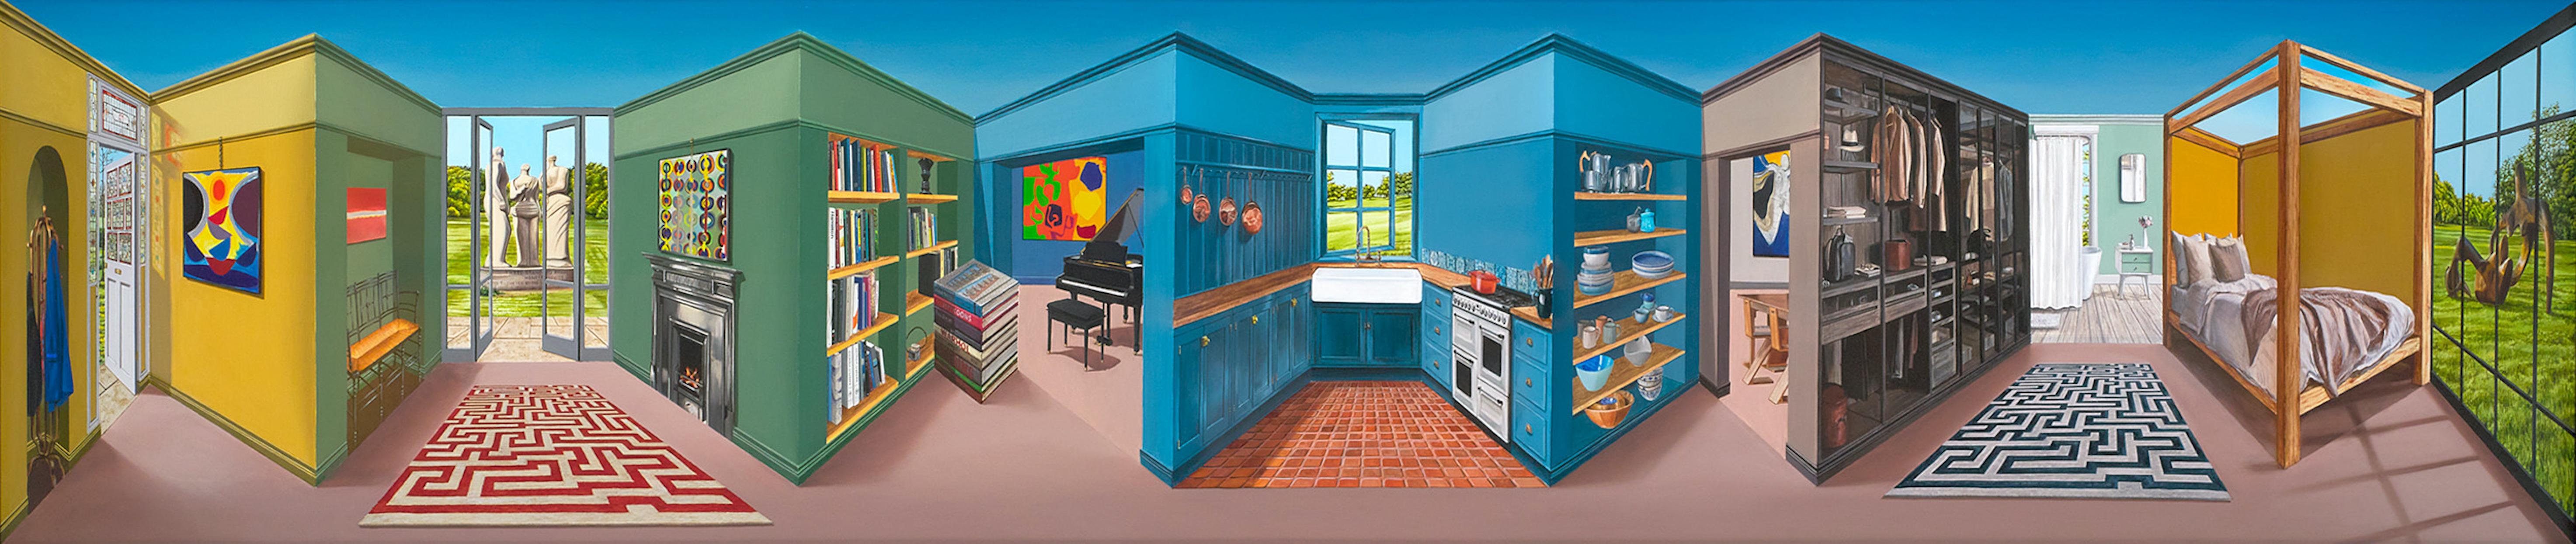 Patrick Hughes
b. 1939  British

Ideal Home

Oil on panel
Signed, titled and dated “Ideal Home / Patrick Hughes / 2023”

Patrick Hughes, a London artist, creates works that blend painting, sculpture and optical illusion, offering a dynamic visual